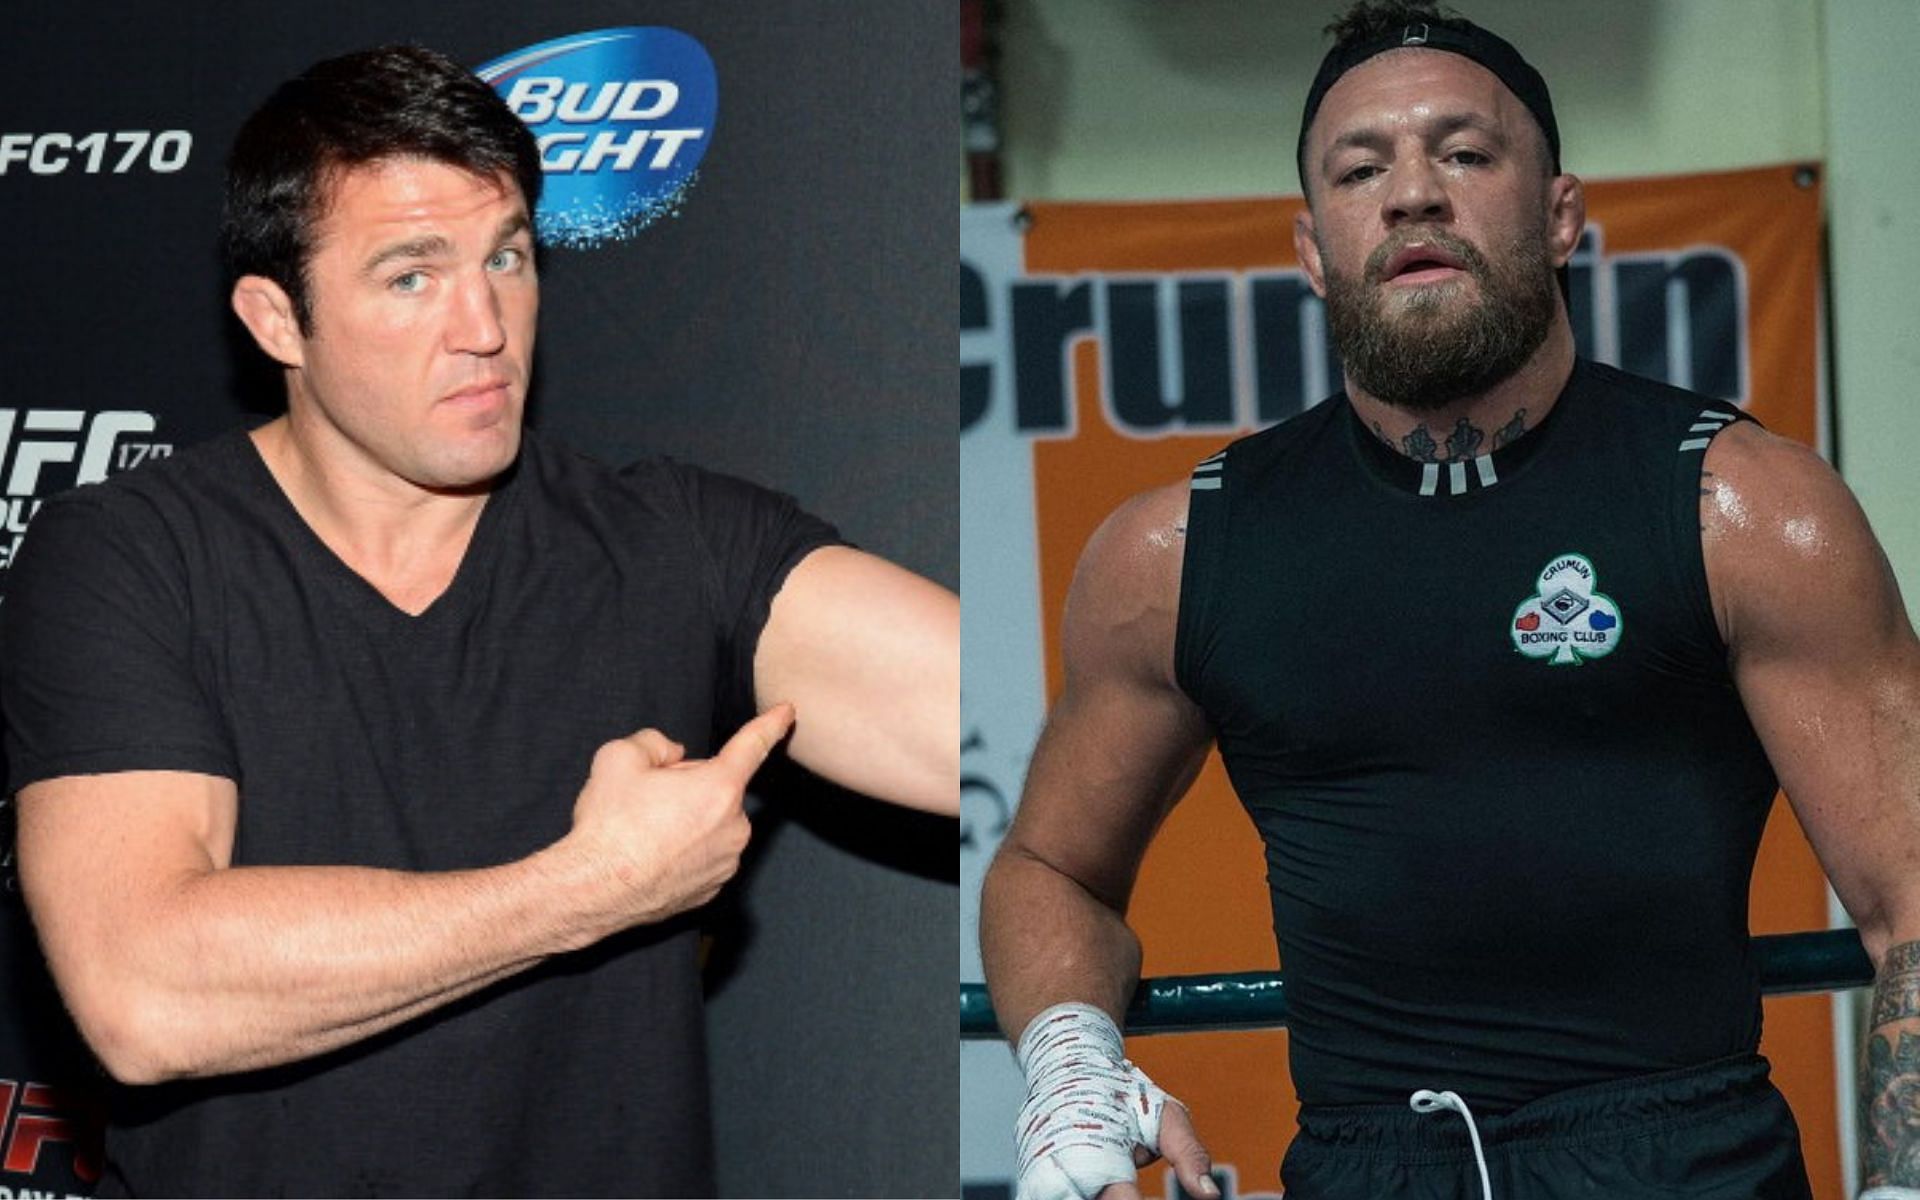 Chael Sonnen (left) and Conor McGregor